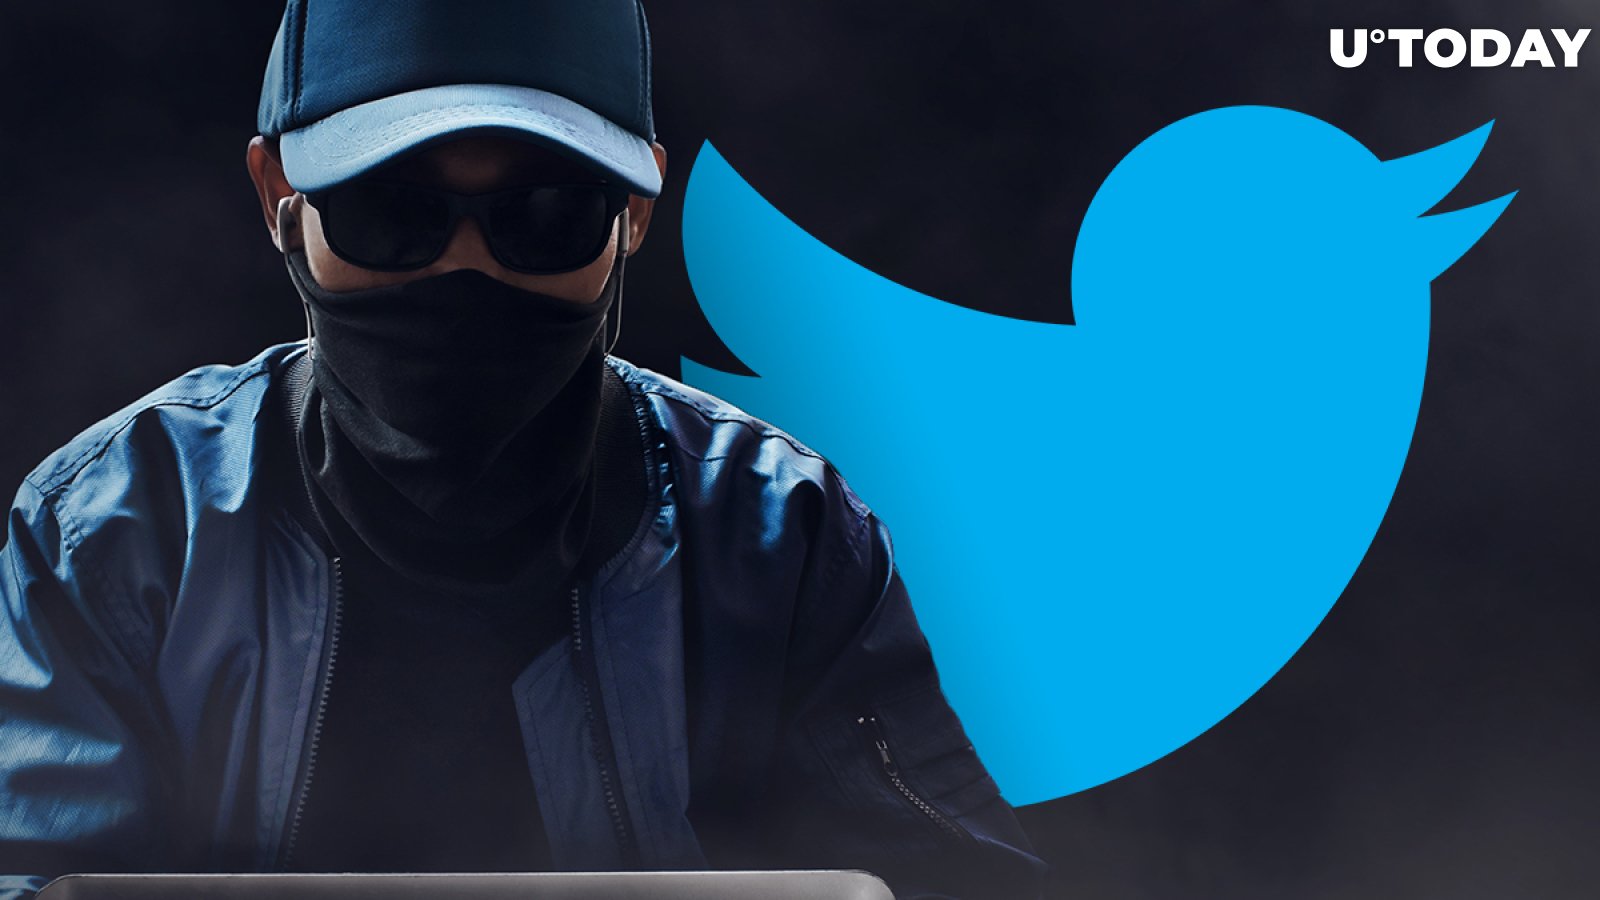 Here’s How Bitcoin Scammers Hacked Twitter Accounts of Barack Obama, Bill Gates, and Other Prominent Users